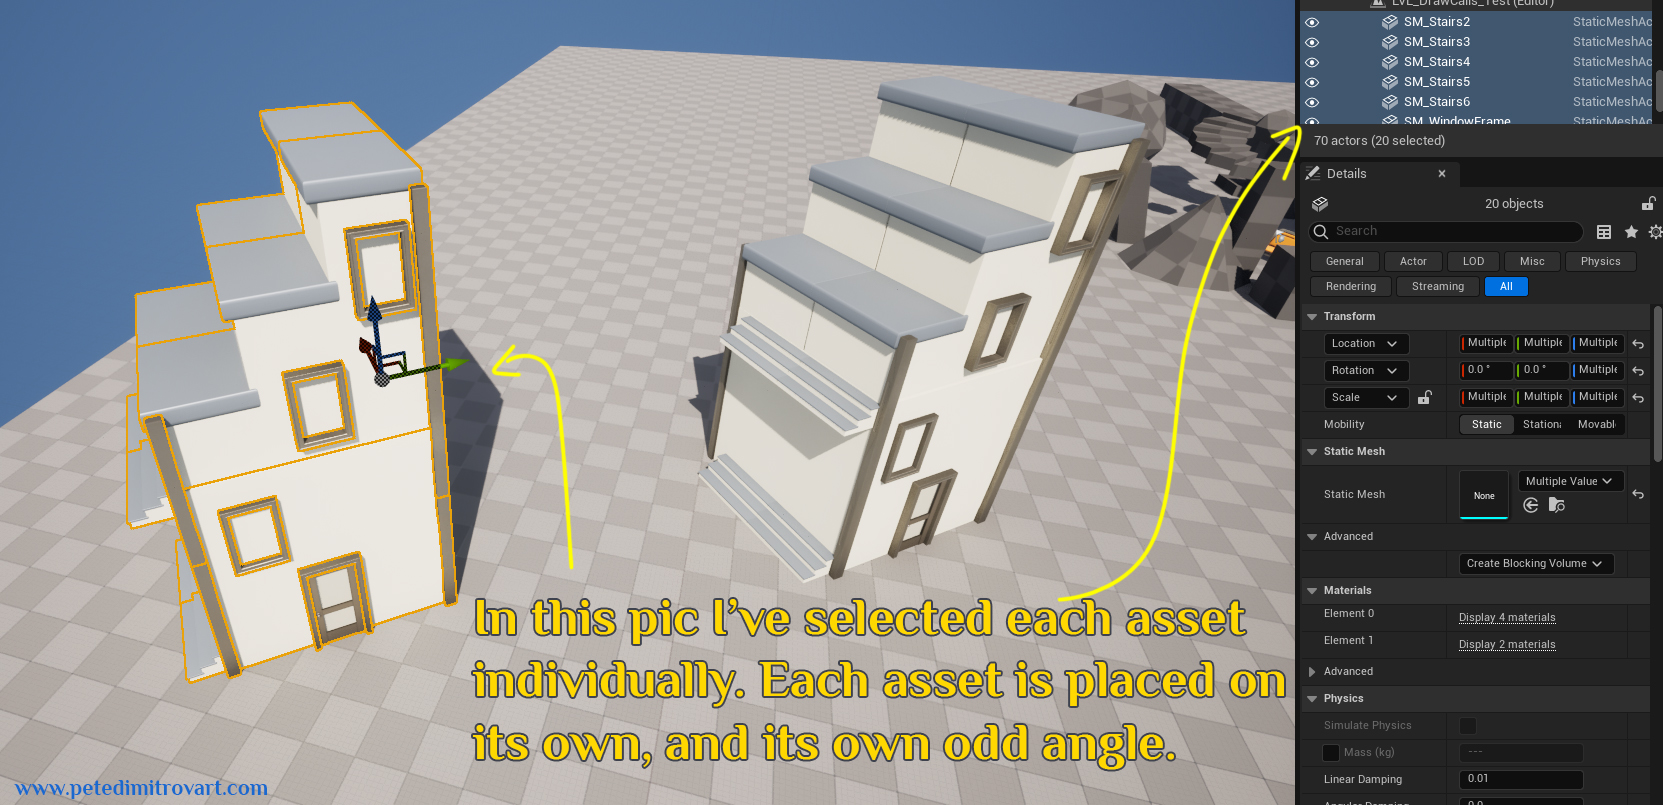 Screenshot from a blank level. In the middle are two identical houses. Left is just meshes in the world, right is meshes that are inside a blueprint instead. A yellow text reads “In this pic I’ve selected each asset individually. Each asset is placed on its own, and its own odd angle.”.